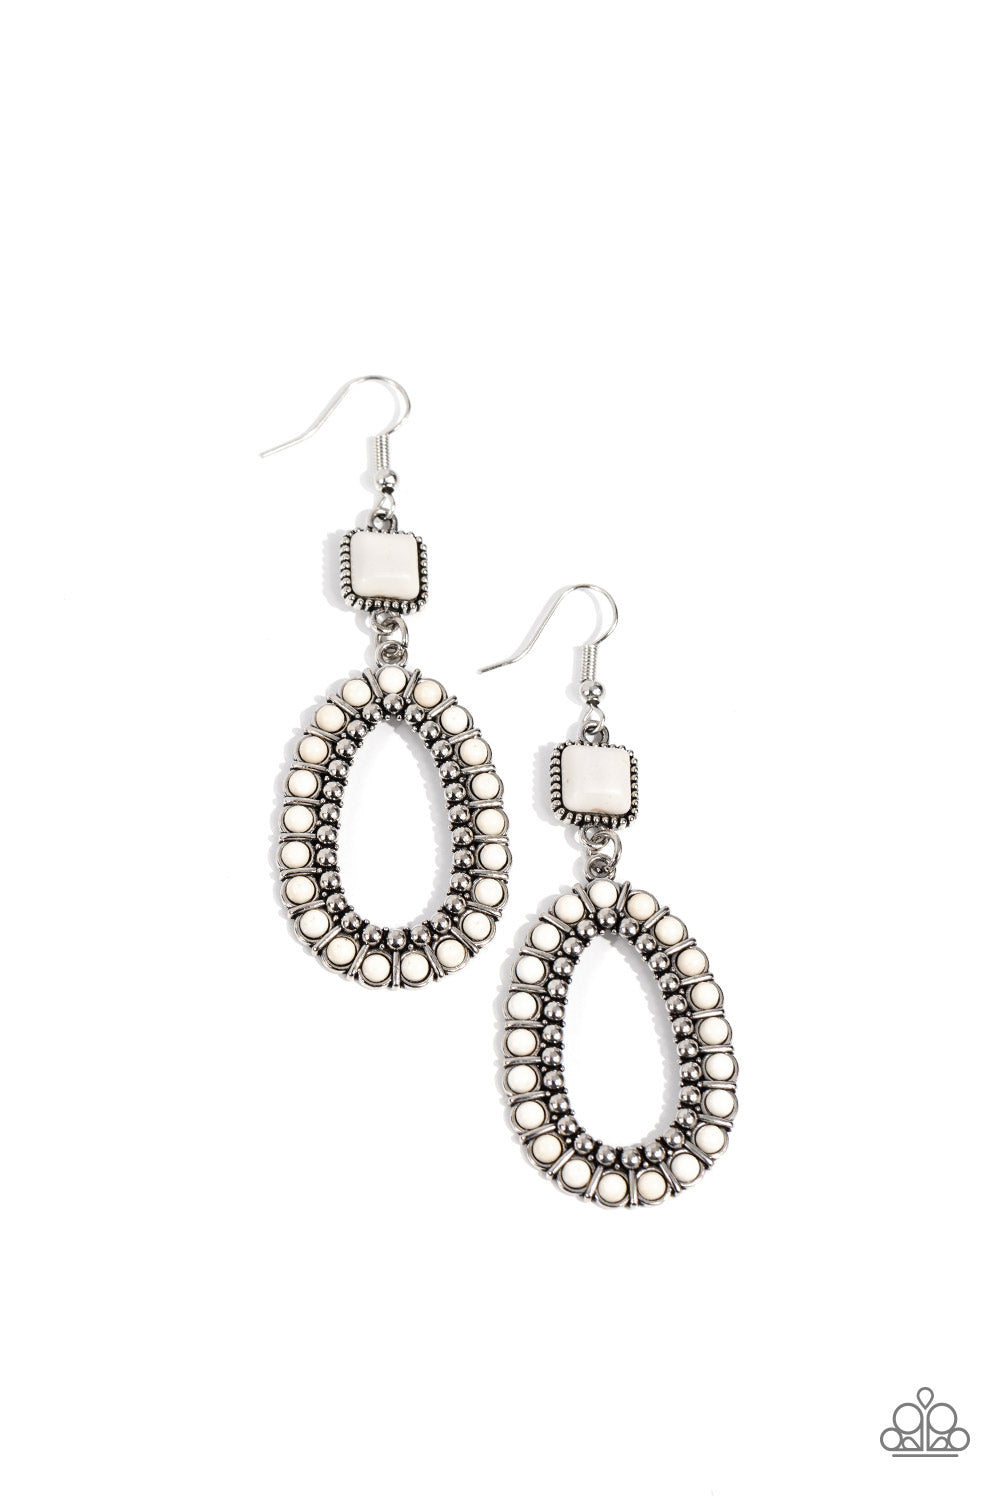 five-dollar-jewelry-napa-valley-luxe-white-earrings-paparazzi-accessories